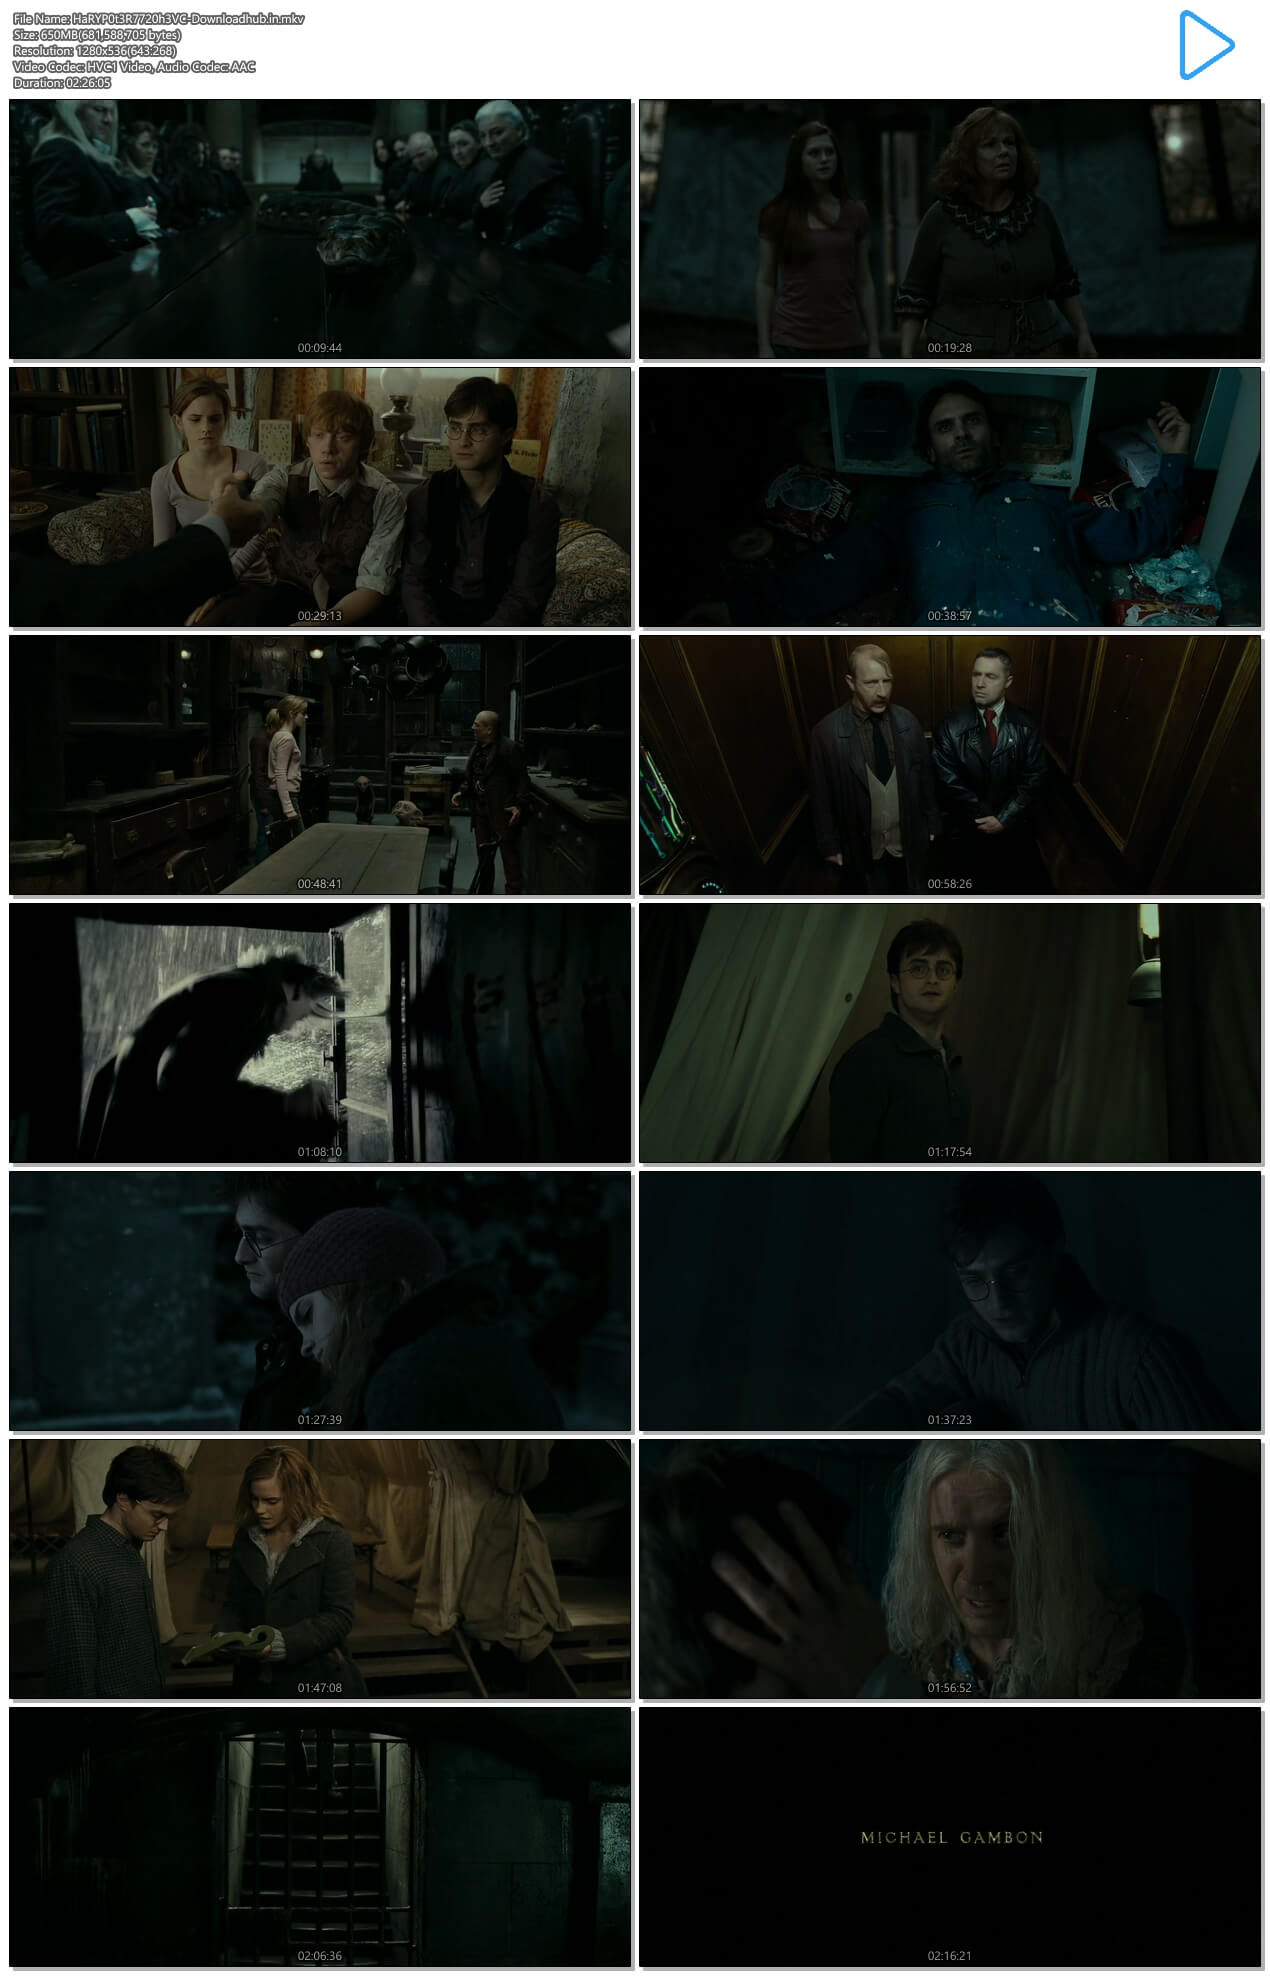 harry potter and the deathly hallows part 2 480p